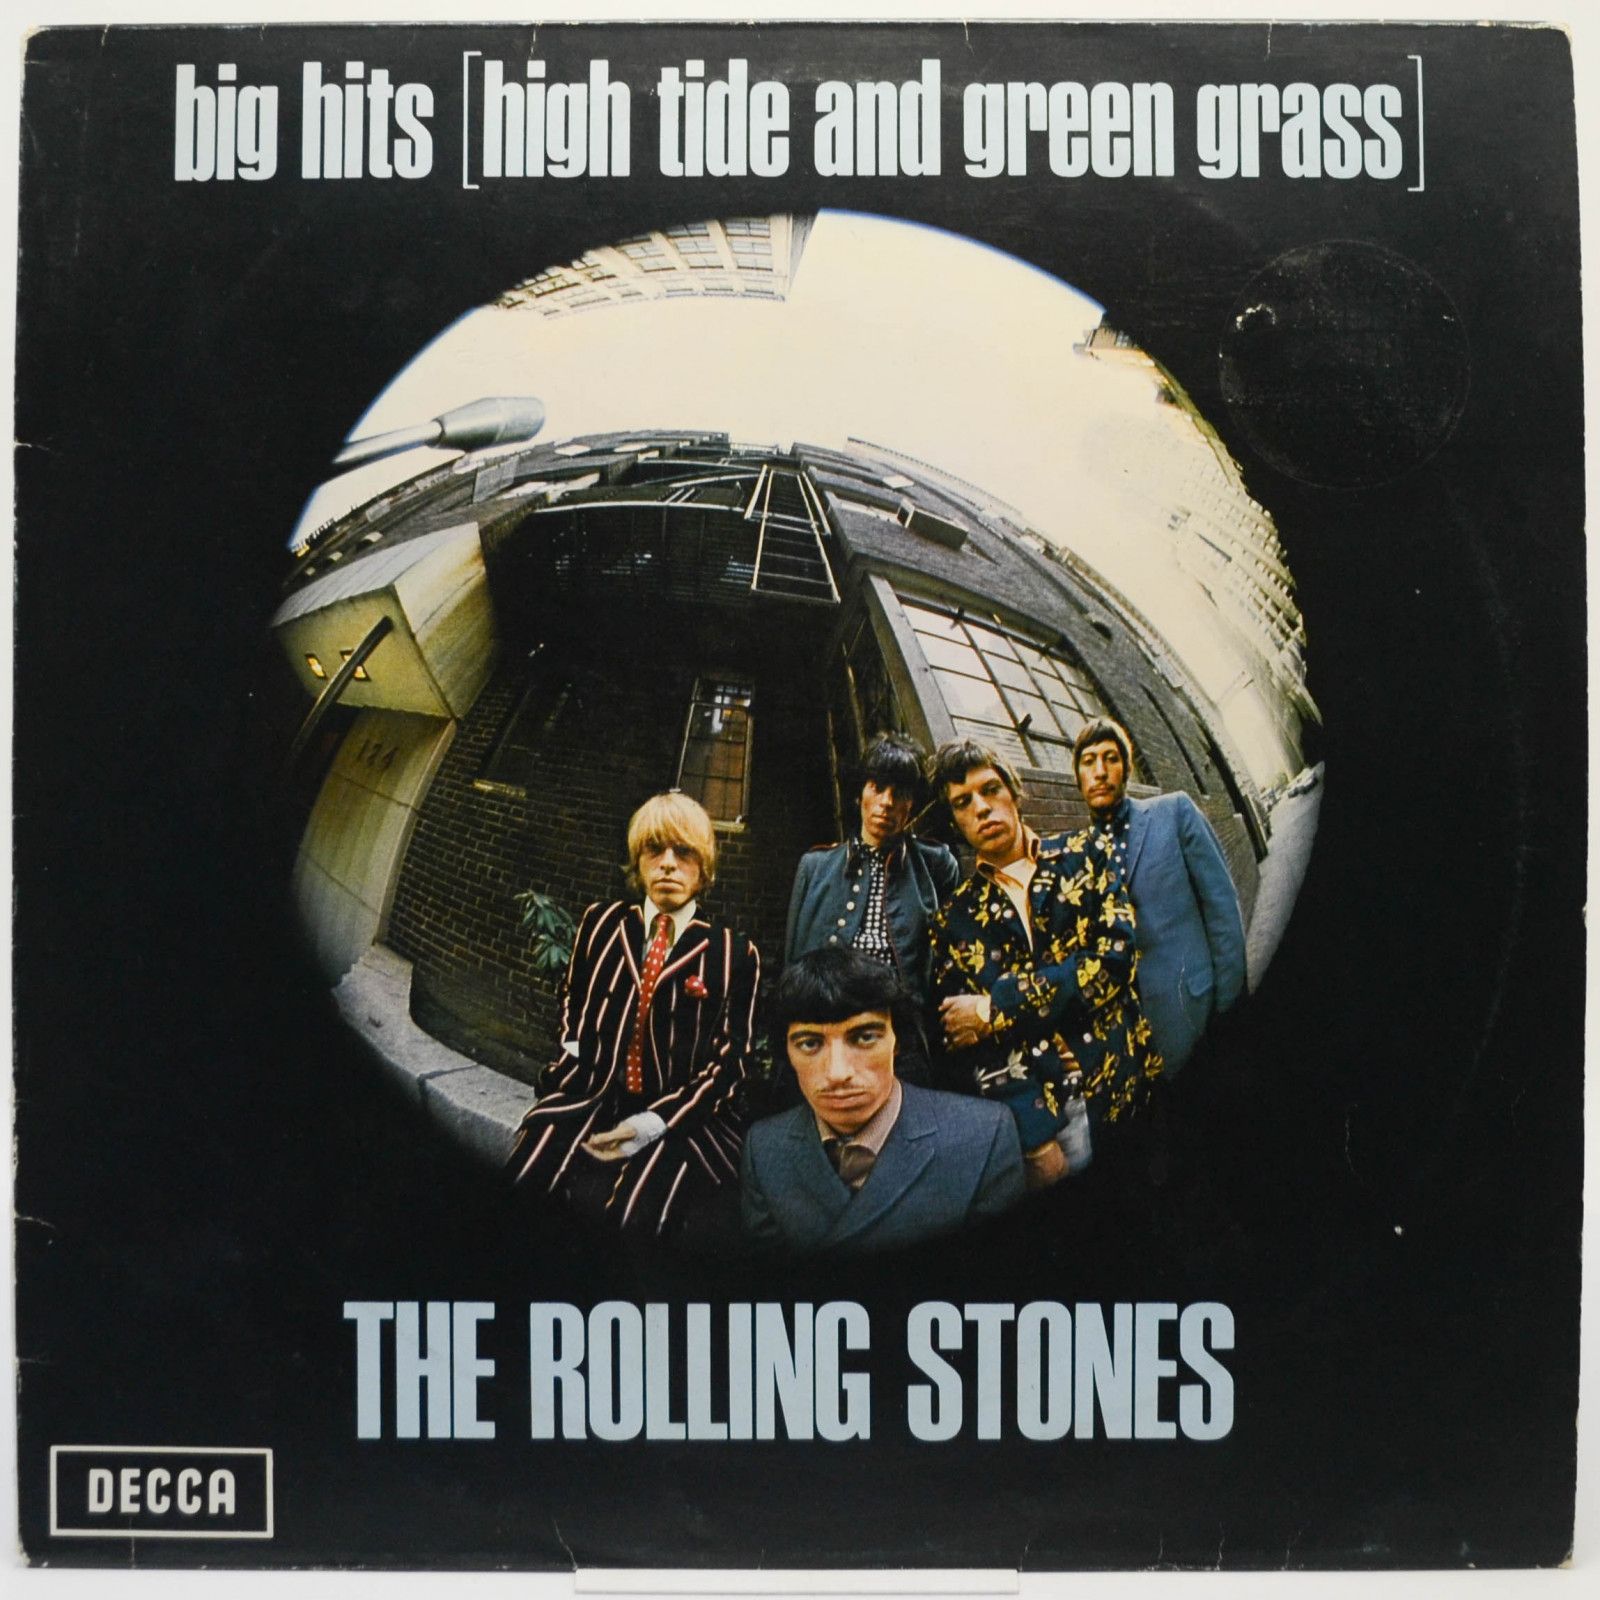 Rolling Stones — Big Hits (High Tide And Green Grass), 1966